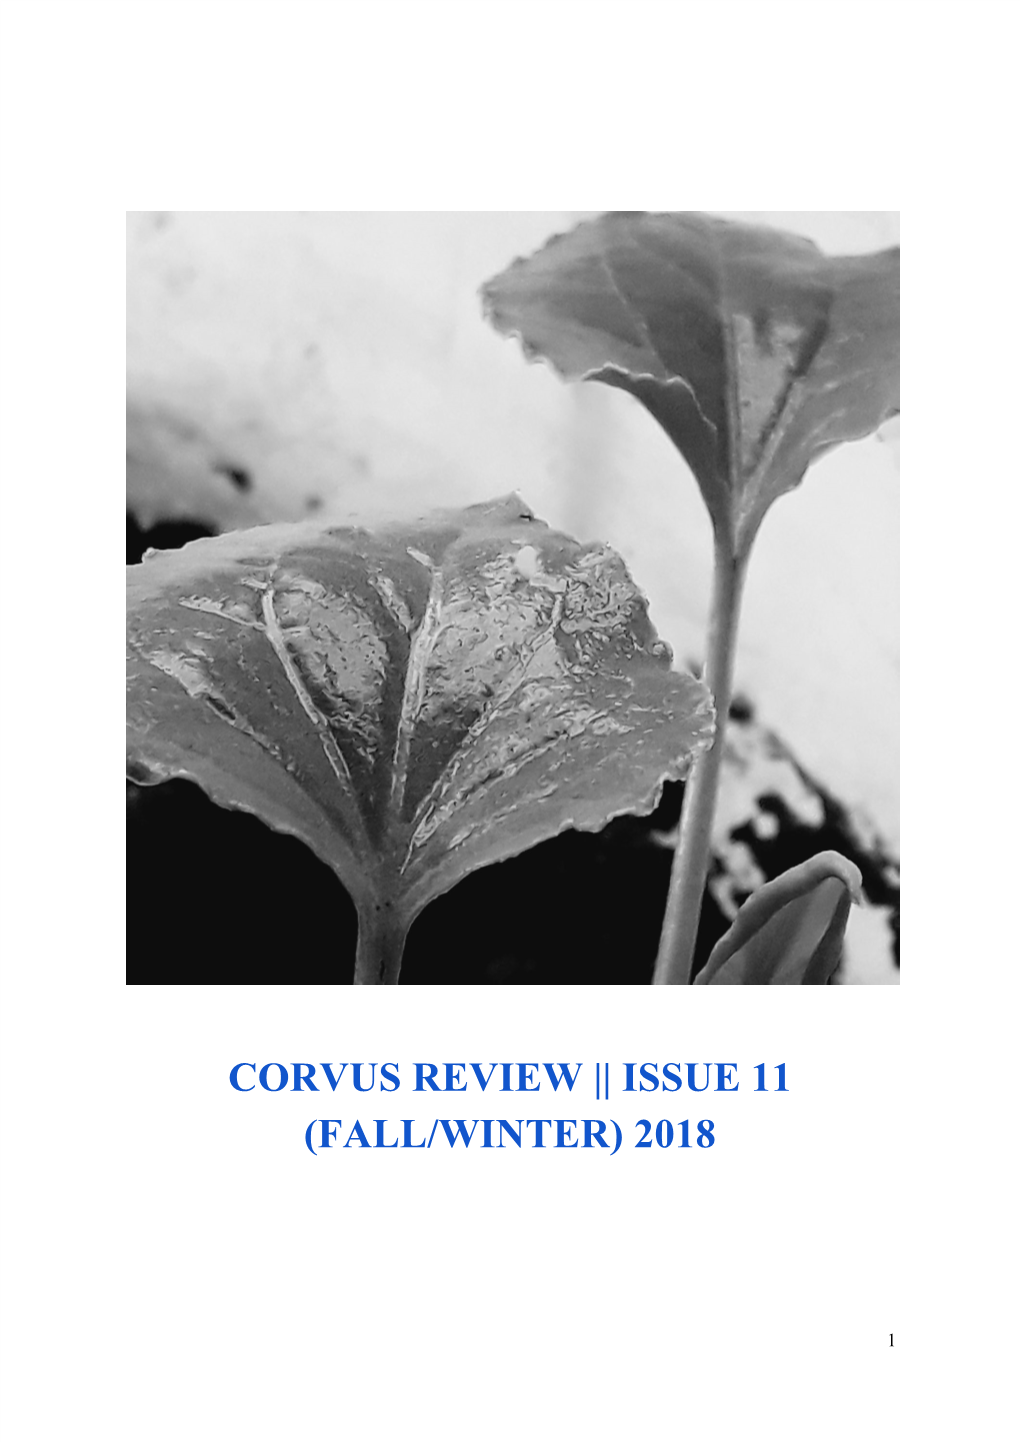 Corvus Review || Issue 11 (Fall/Winter) 2018